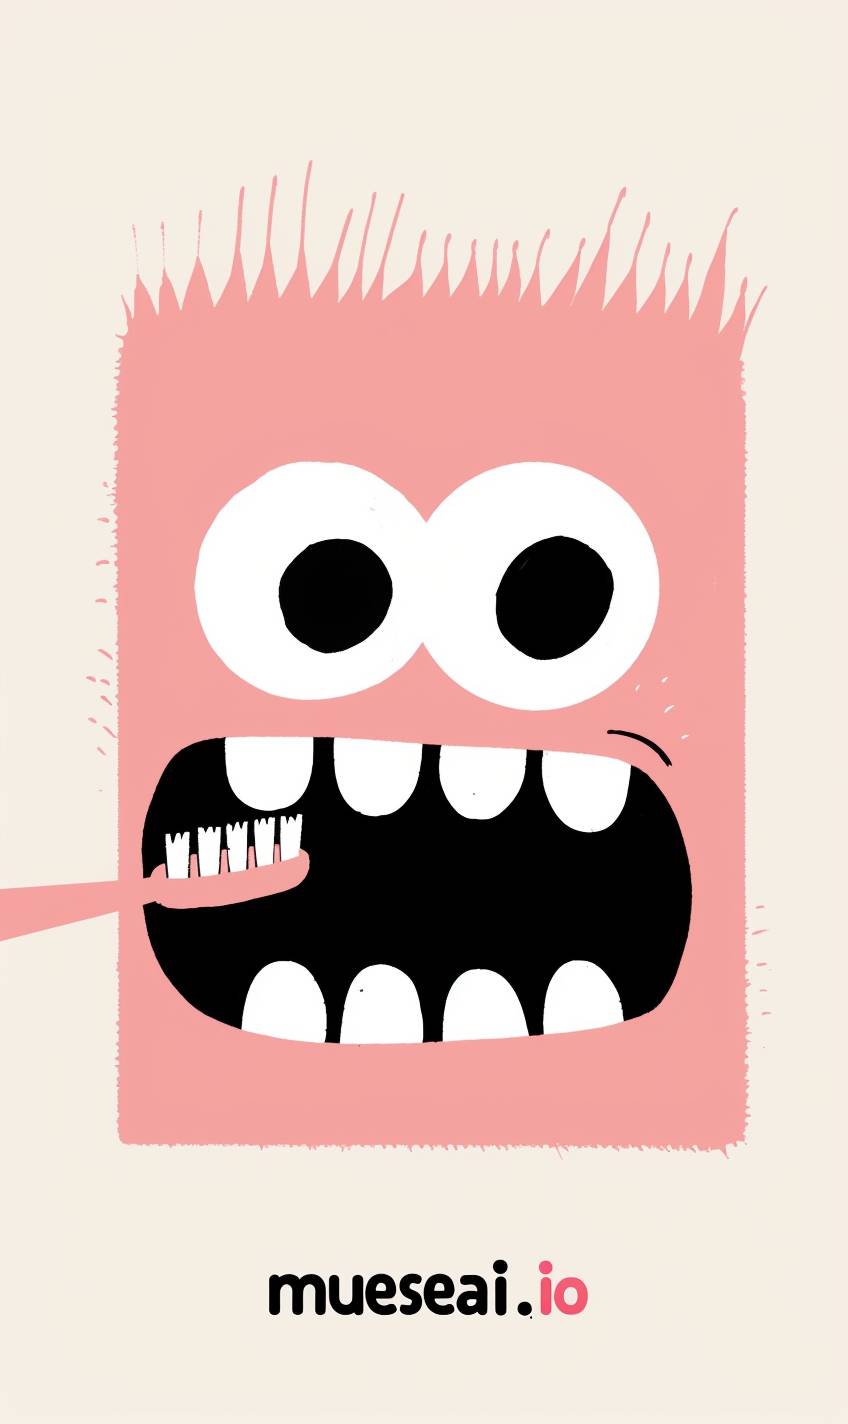 A simple illustration of the text "mueseai.io" with an extreme close up of two black eyes and mouth, a cute pink toothbrush in his open mouth, in the style of Gemma Correll, with a quirky character design and flat pastel colors.